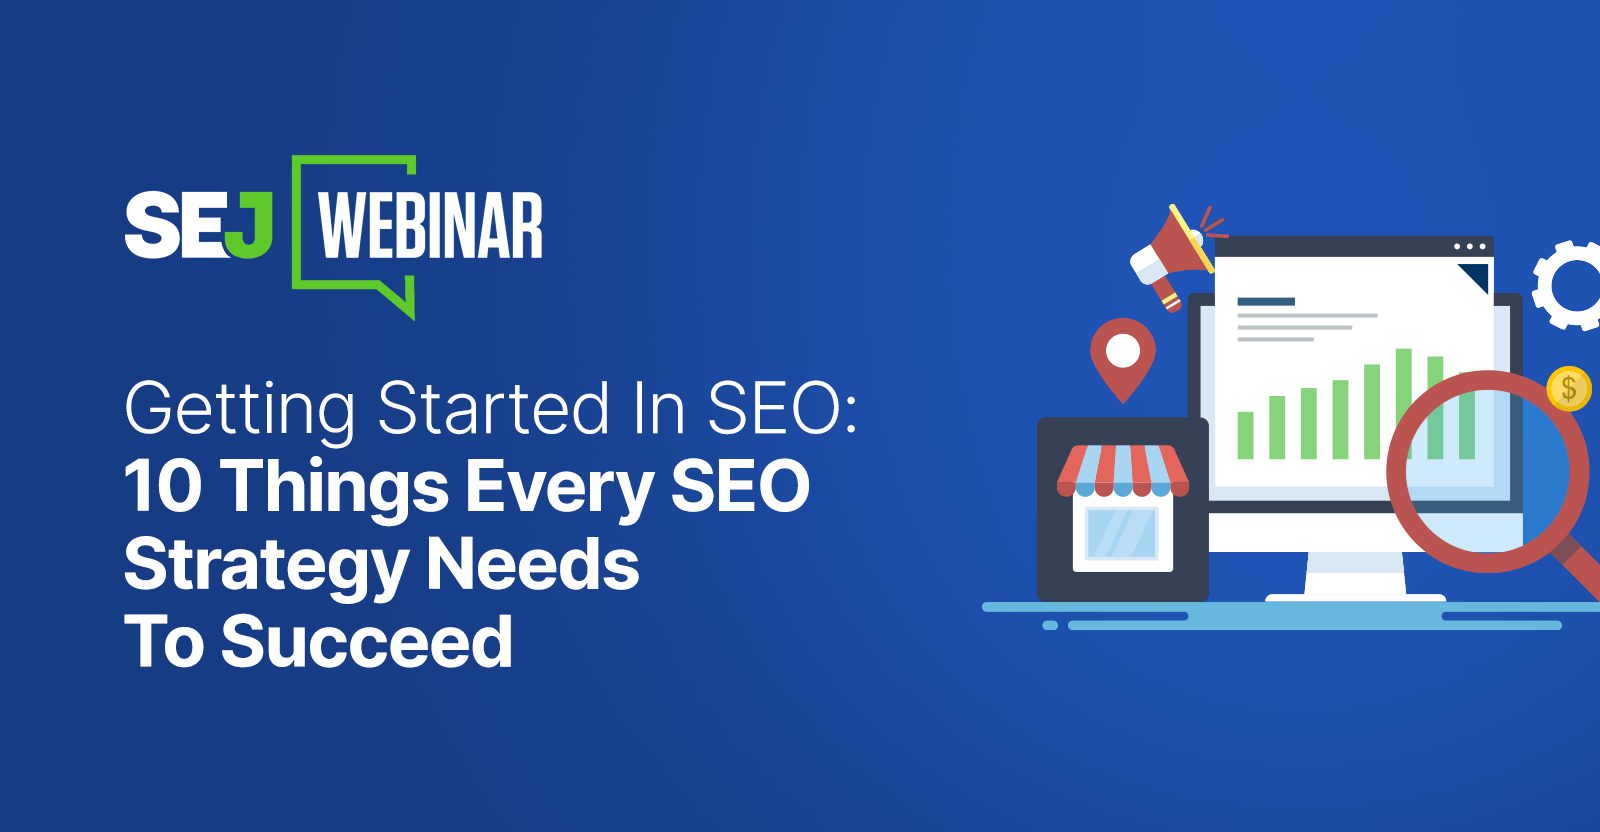 Getting Started In SEO: 10 Things Every SEO Strategy Needs To Succeed